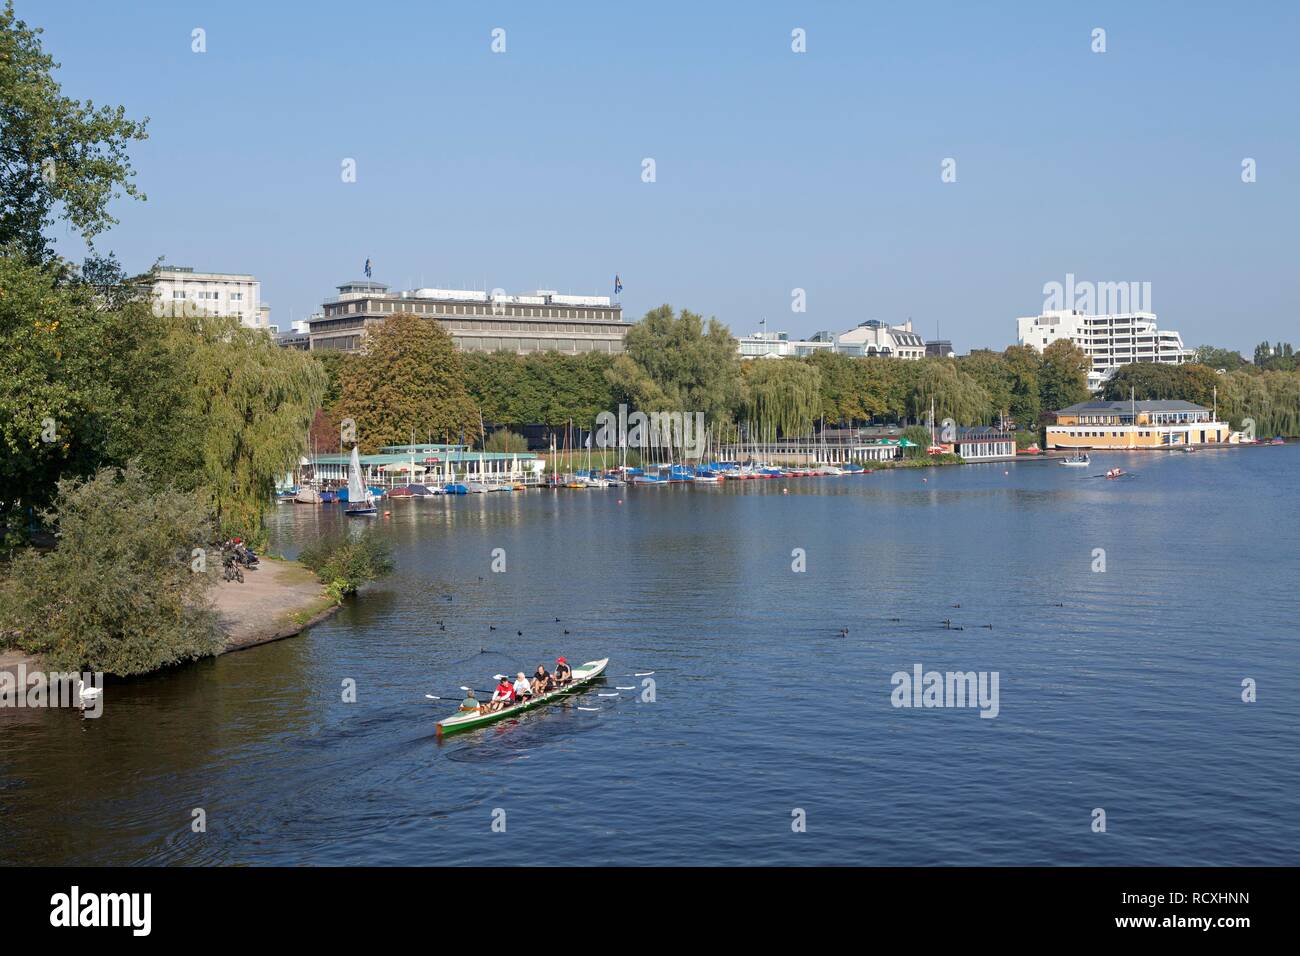 Aussenalster or Outer Alster Lake, Hamburg Stock Photo